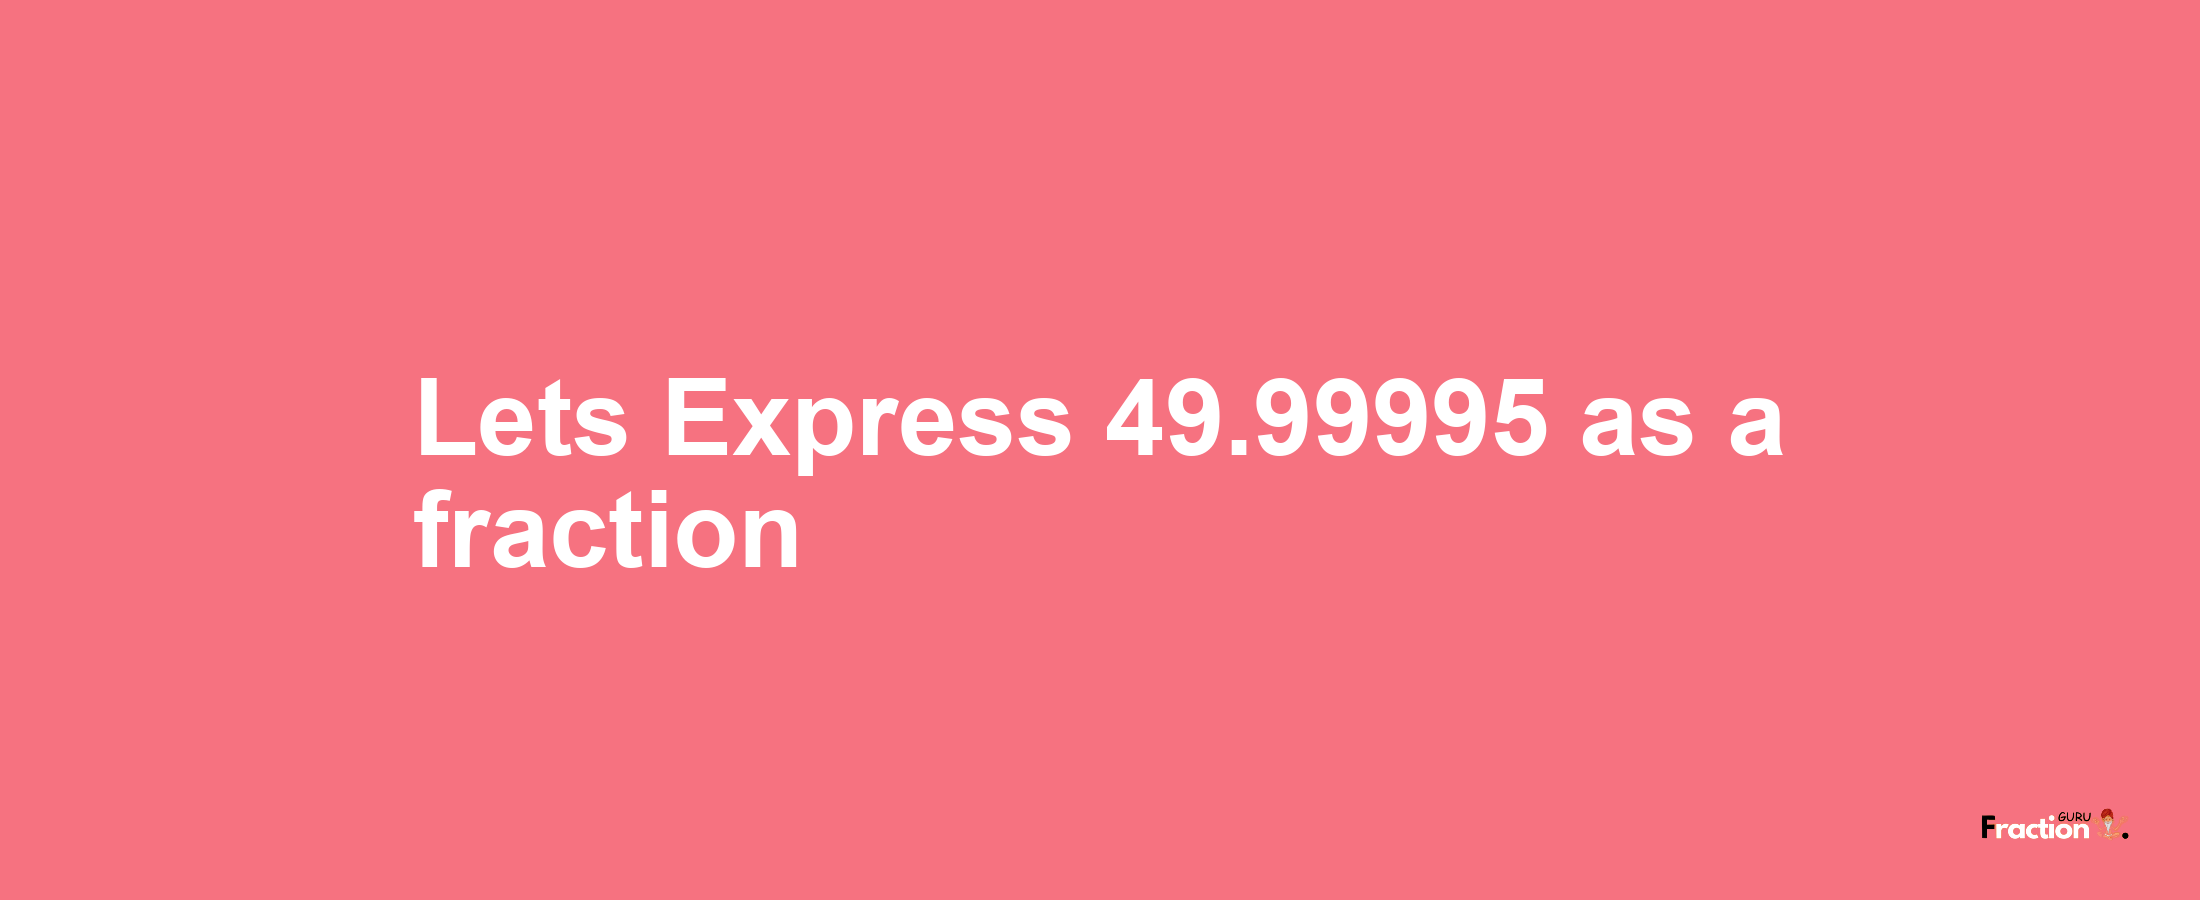 Lets Express 49.99995 as afraction